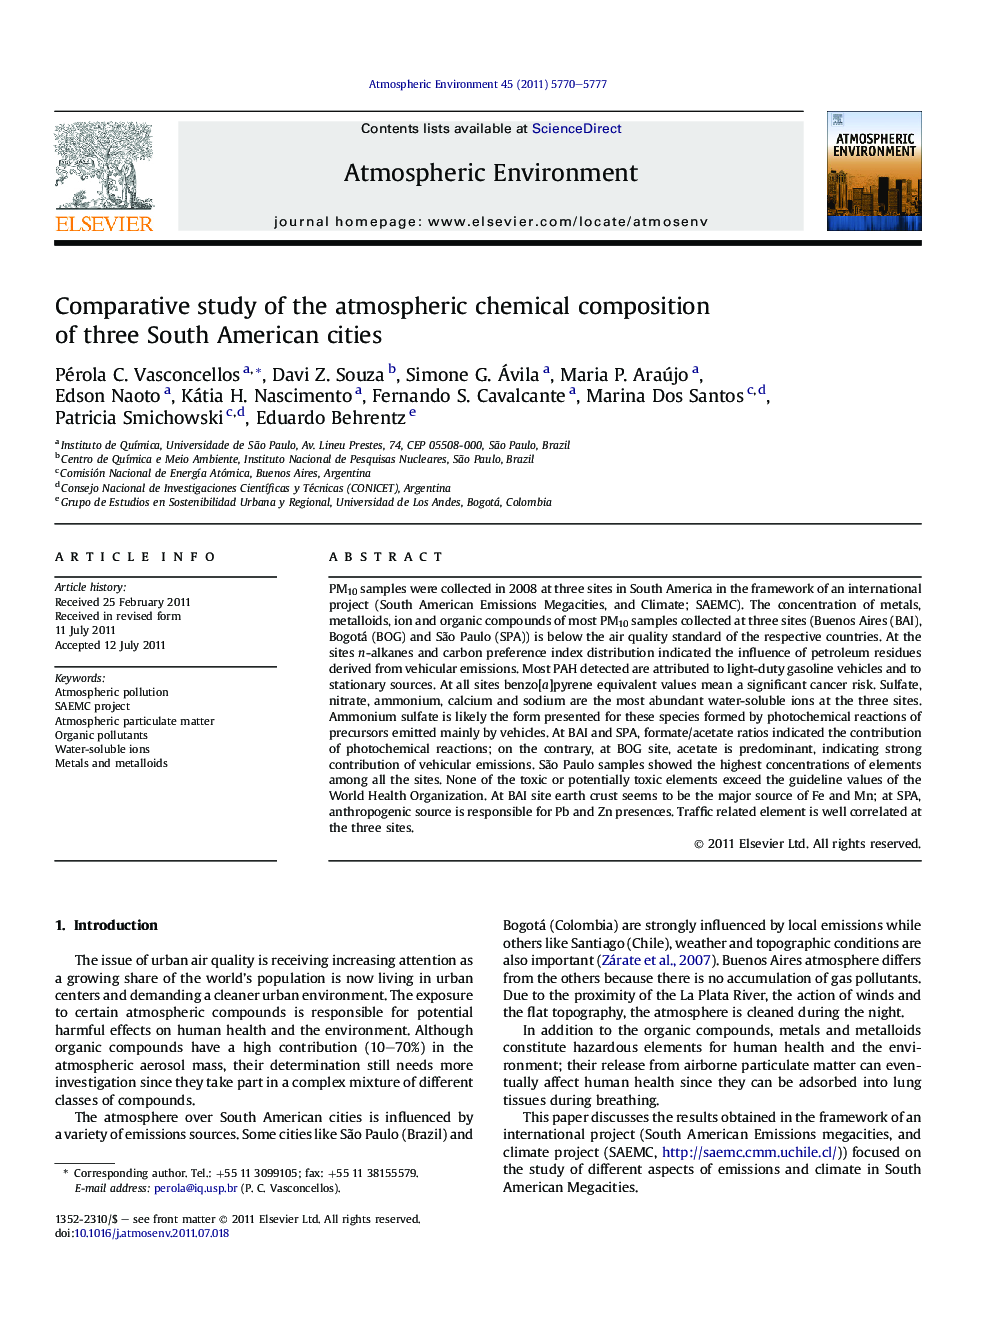 Comparative study of the atmospheric chemical composition of three South American cities